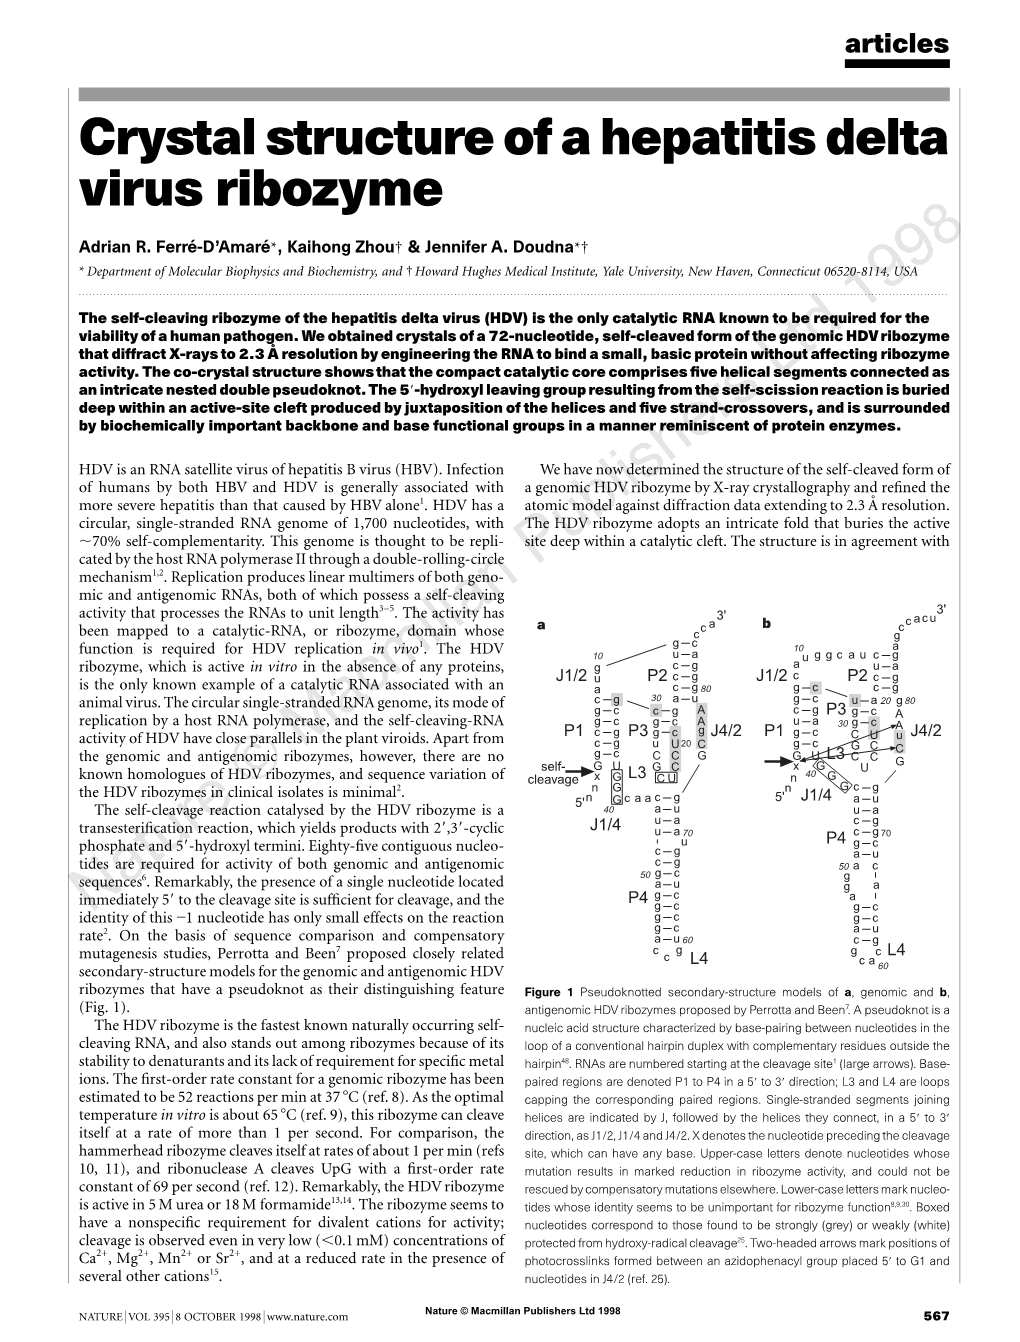 Crystal Structure of a Hepatitis Delta Virus Ribozyme